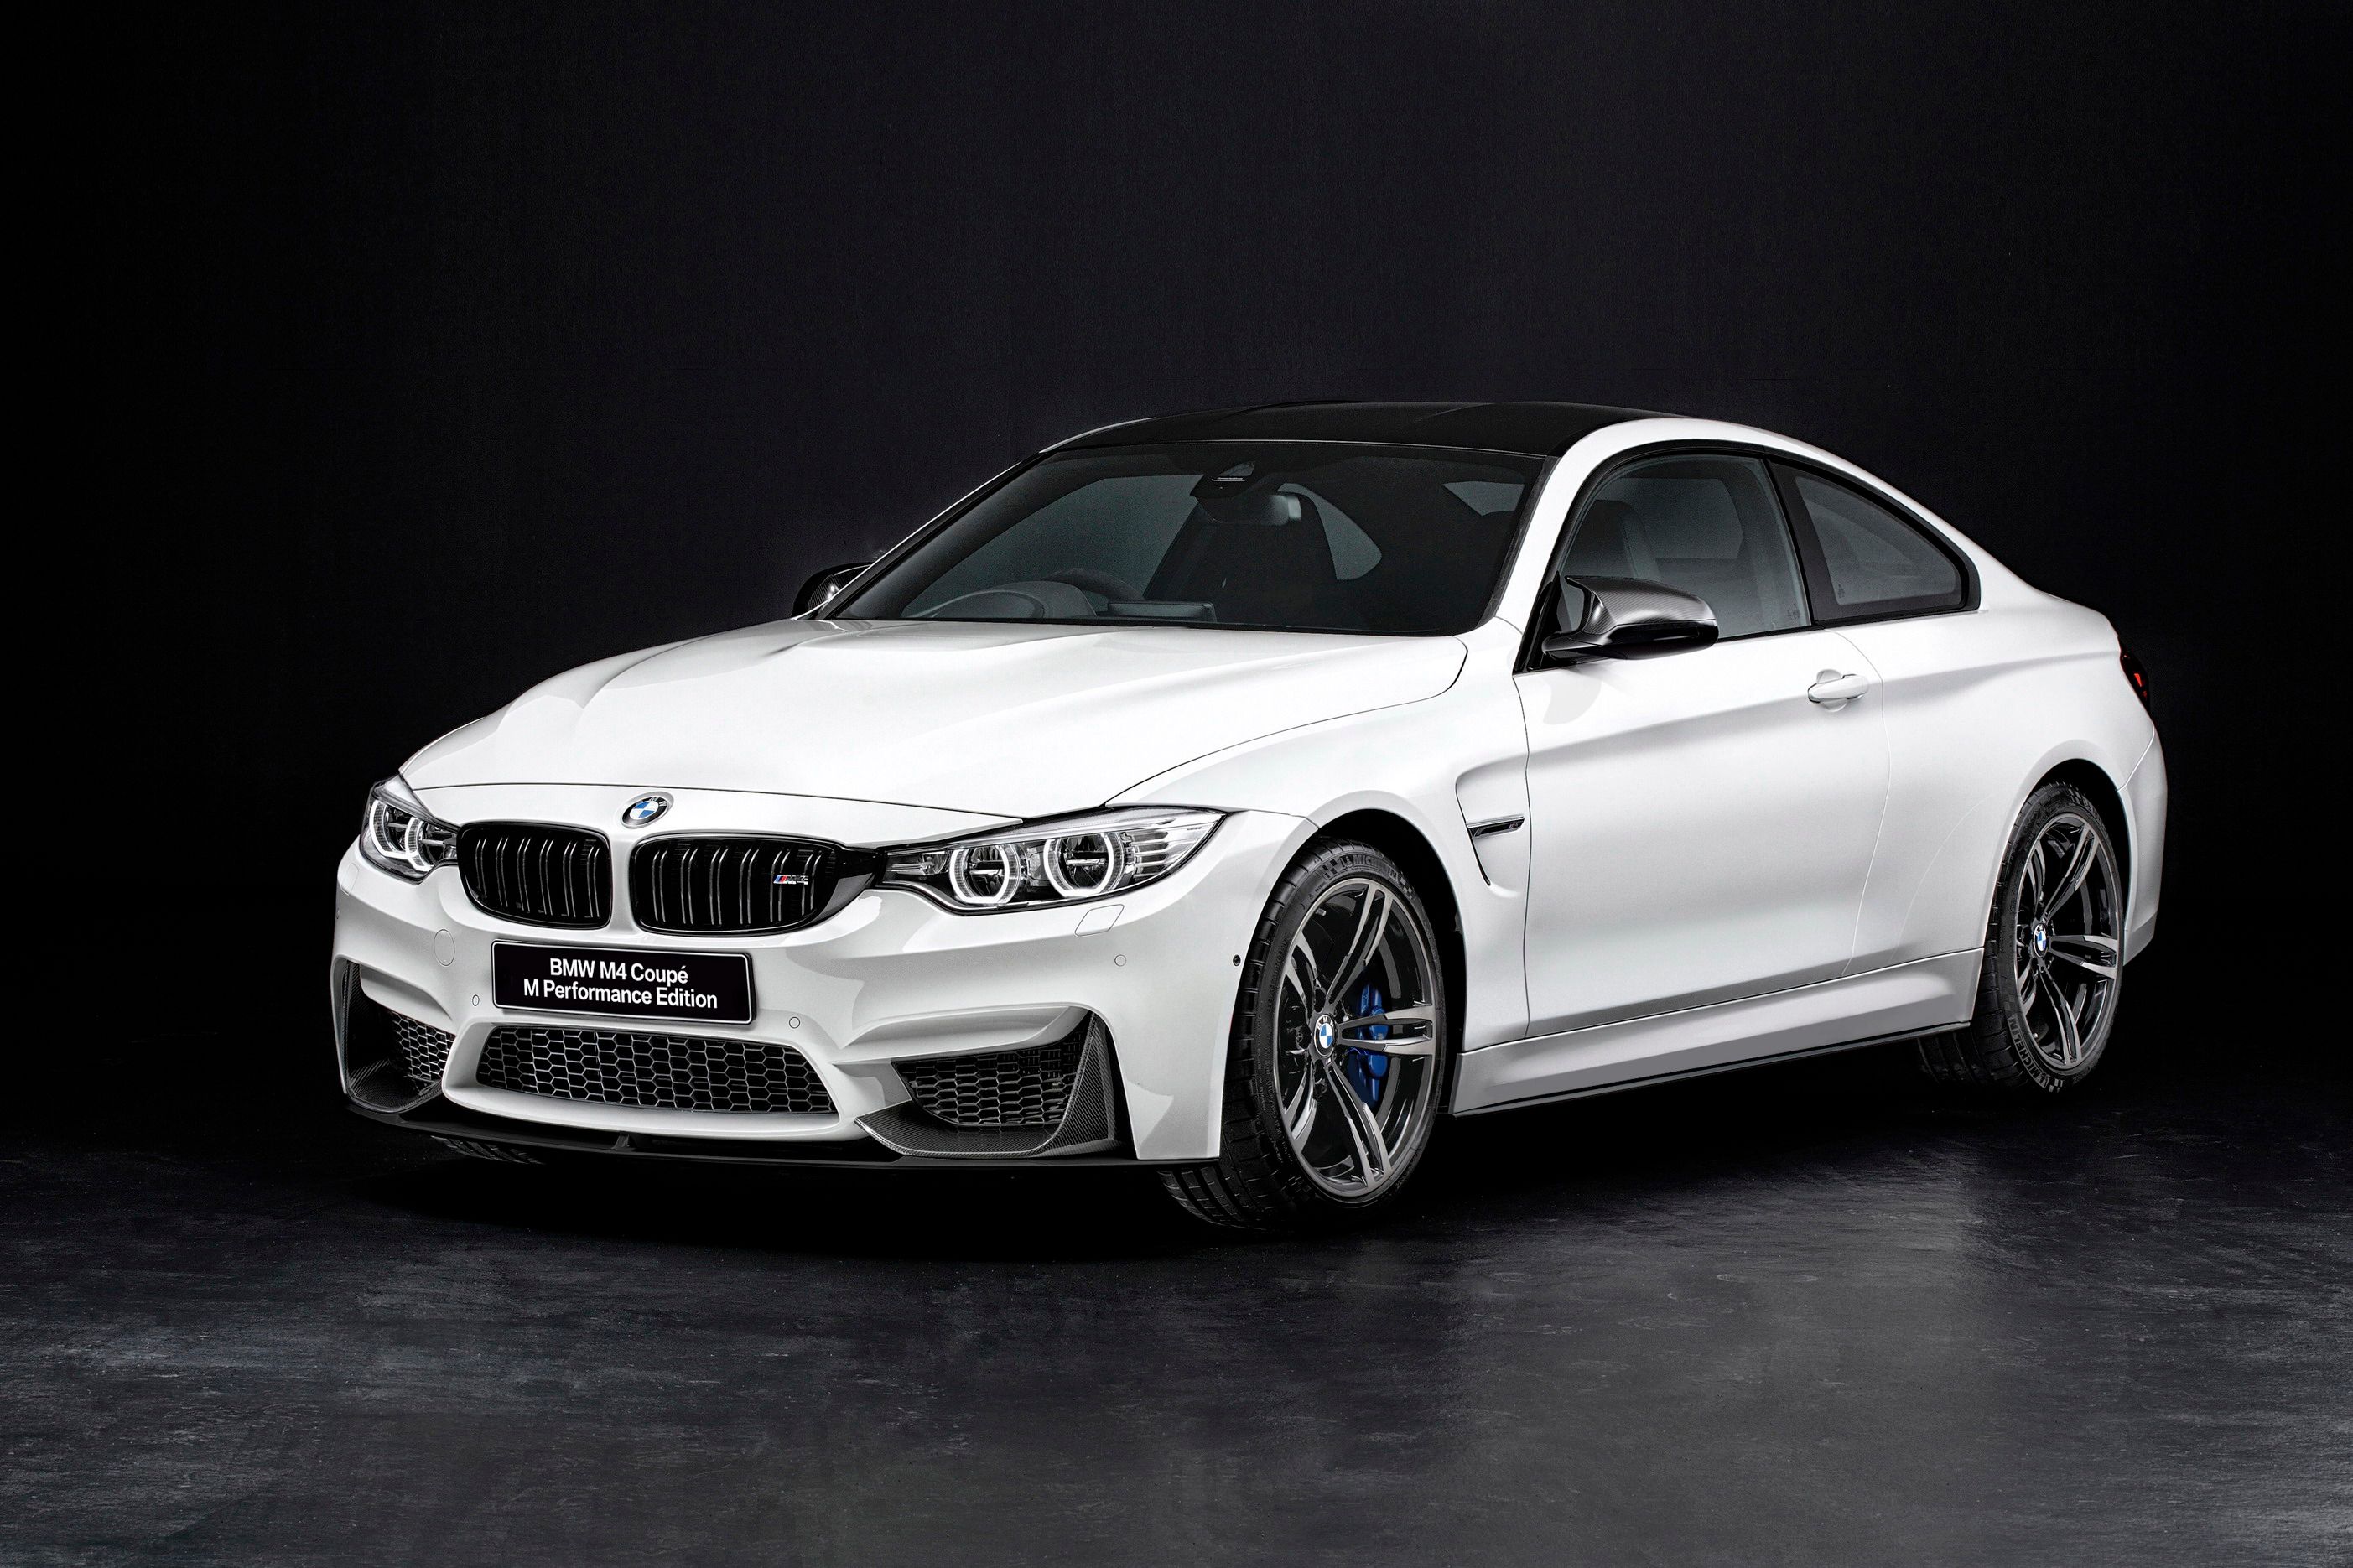 2015 BMW M4 Coupe M Performance Edition